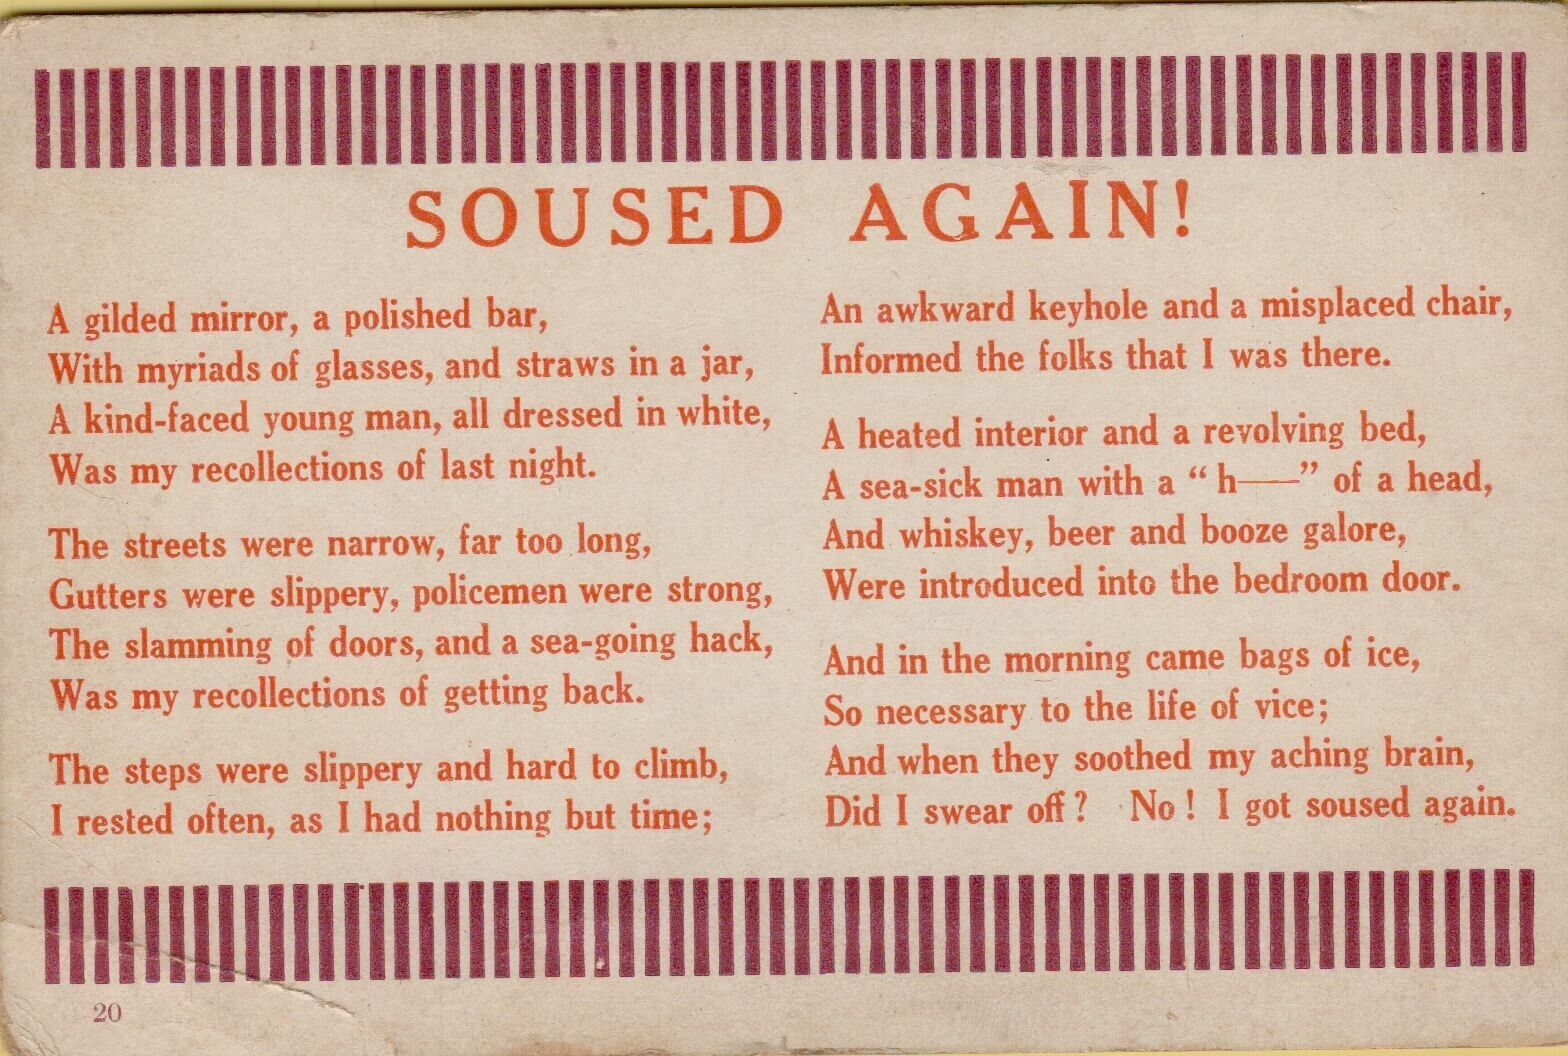 Quotes and Sayings-SOUSED AGAIN Humorous Poem c1920 Unposted